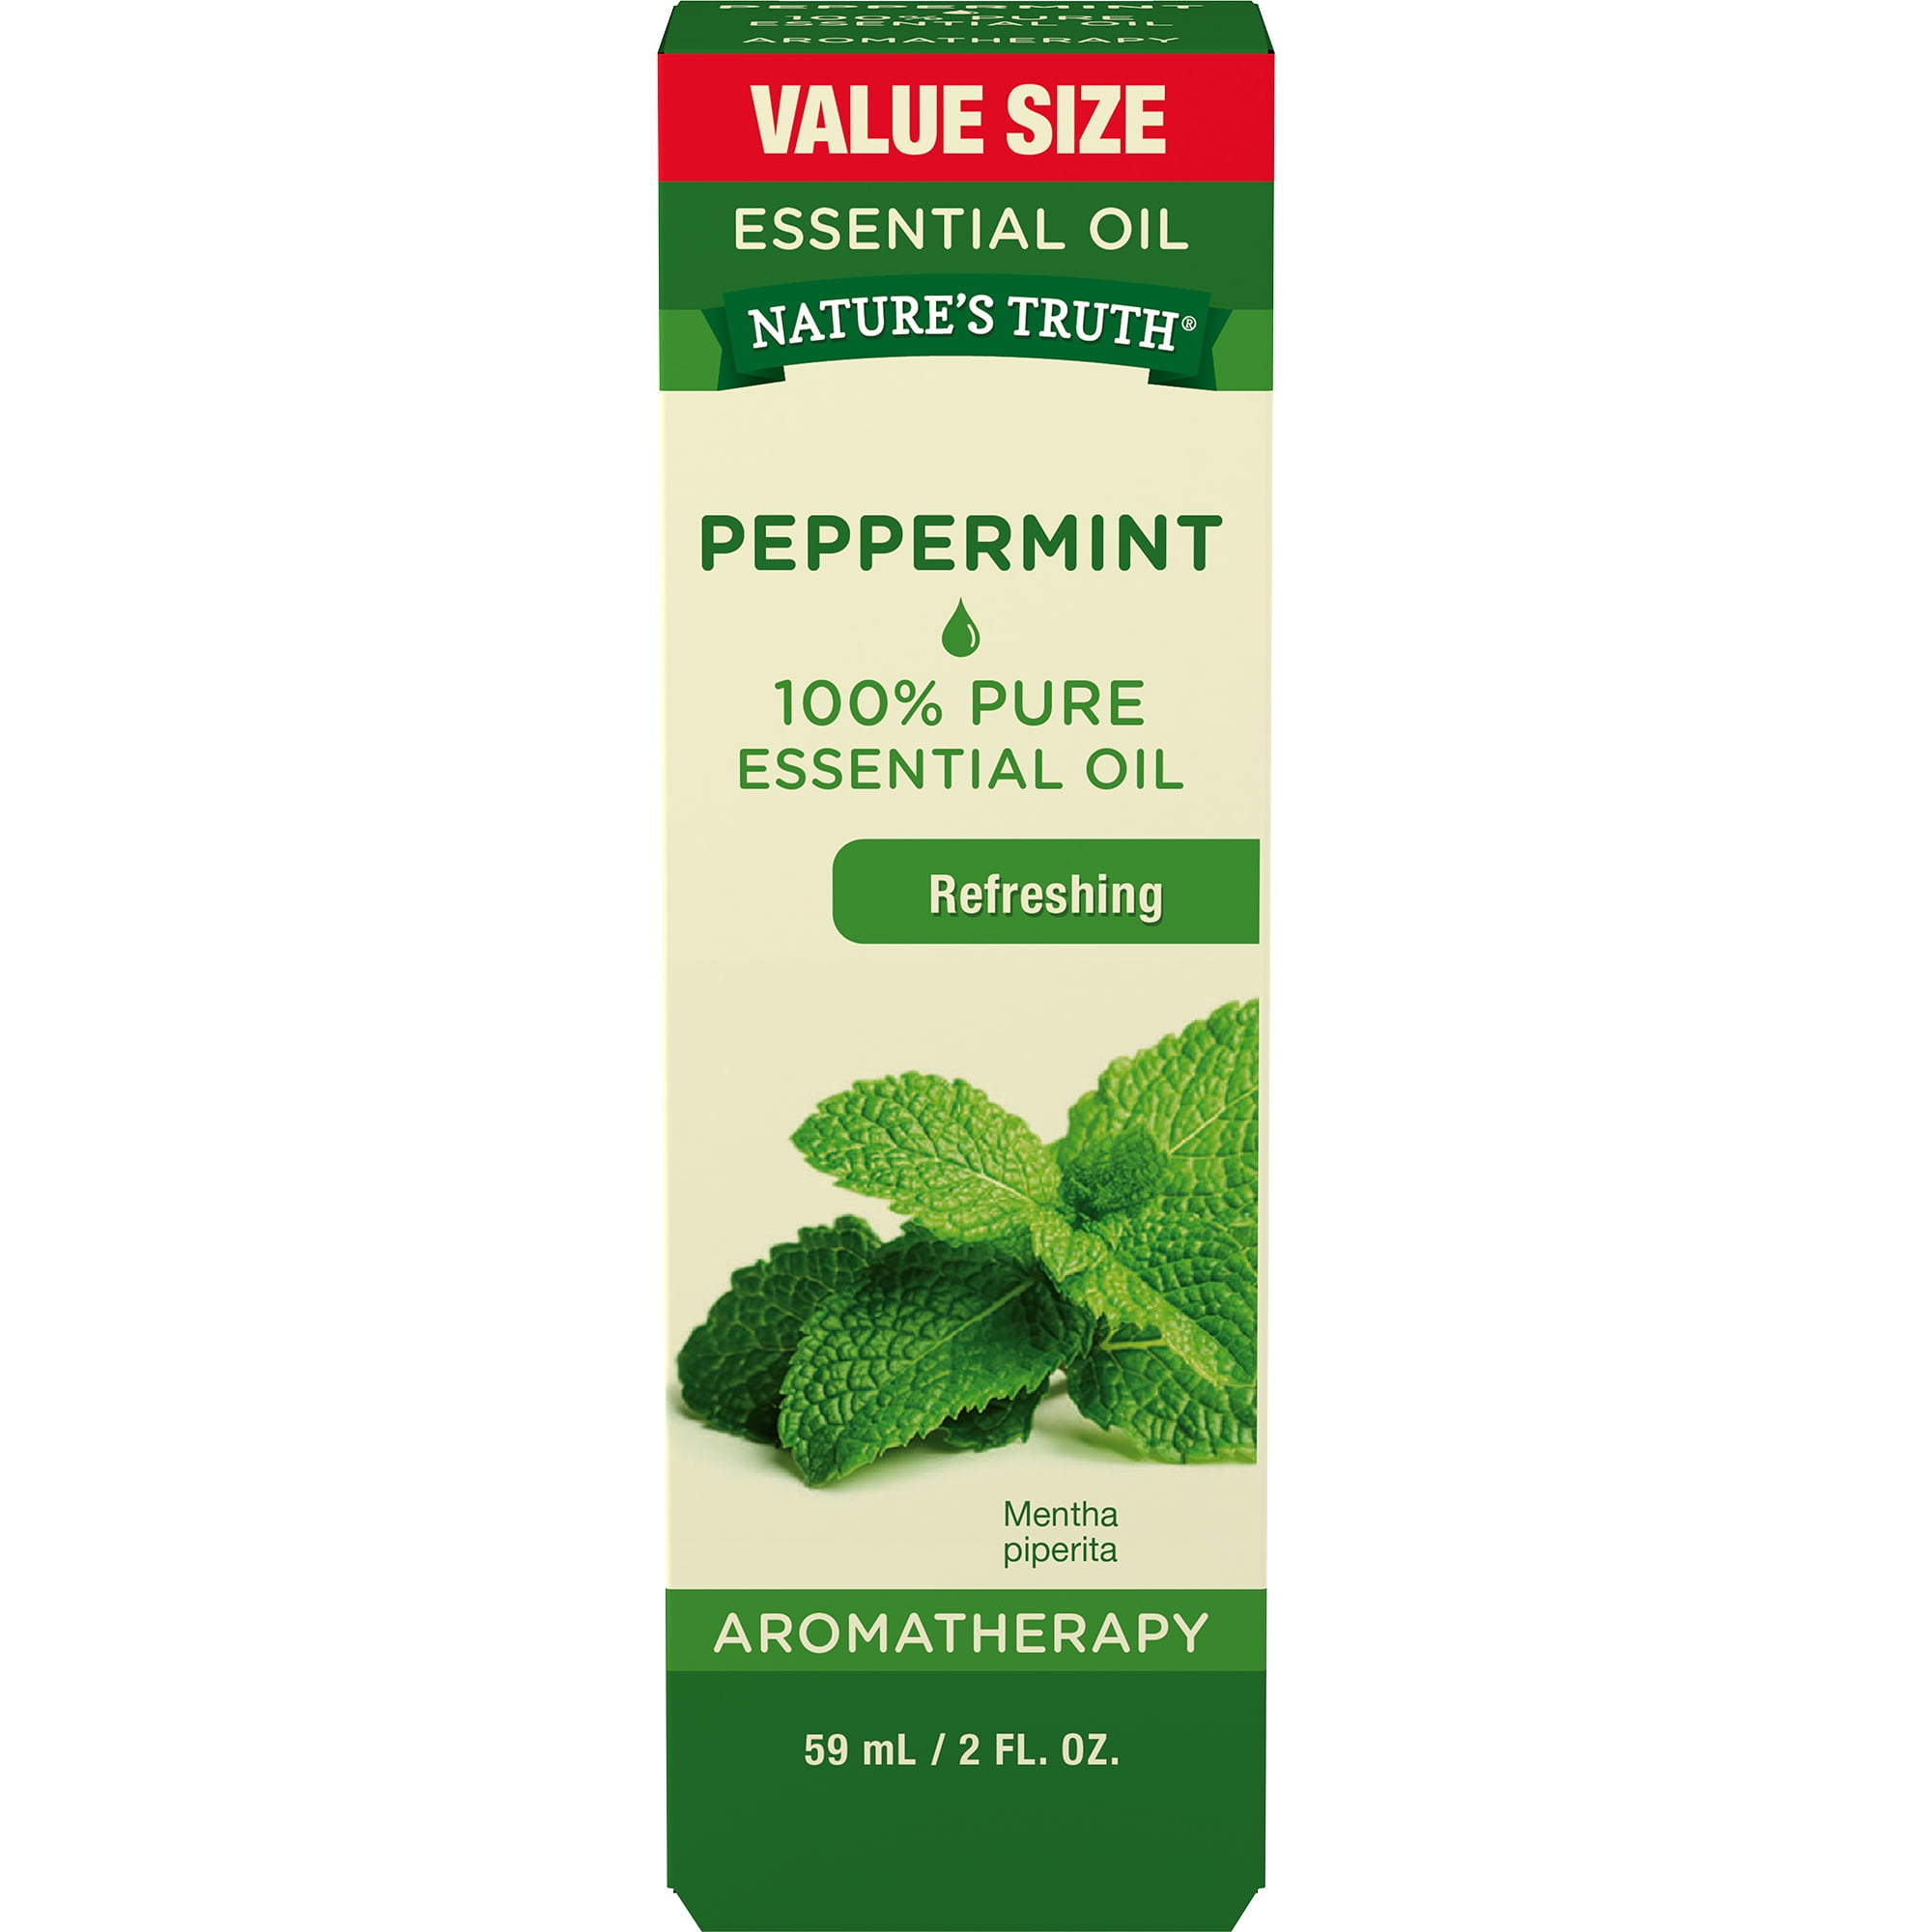 Best of Nature Peppermint 100% Pure Essential Oil, .5 fl oz